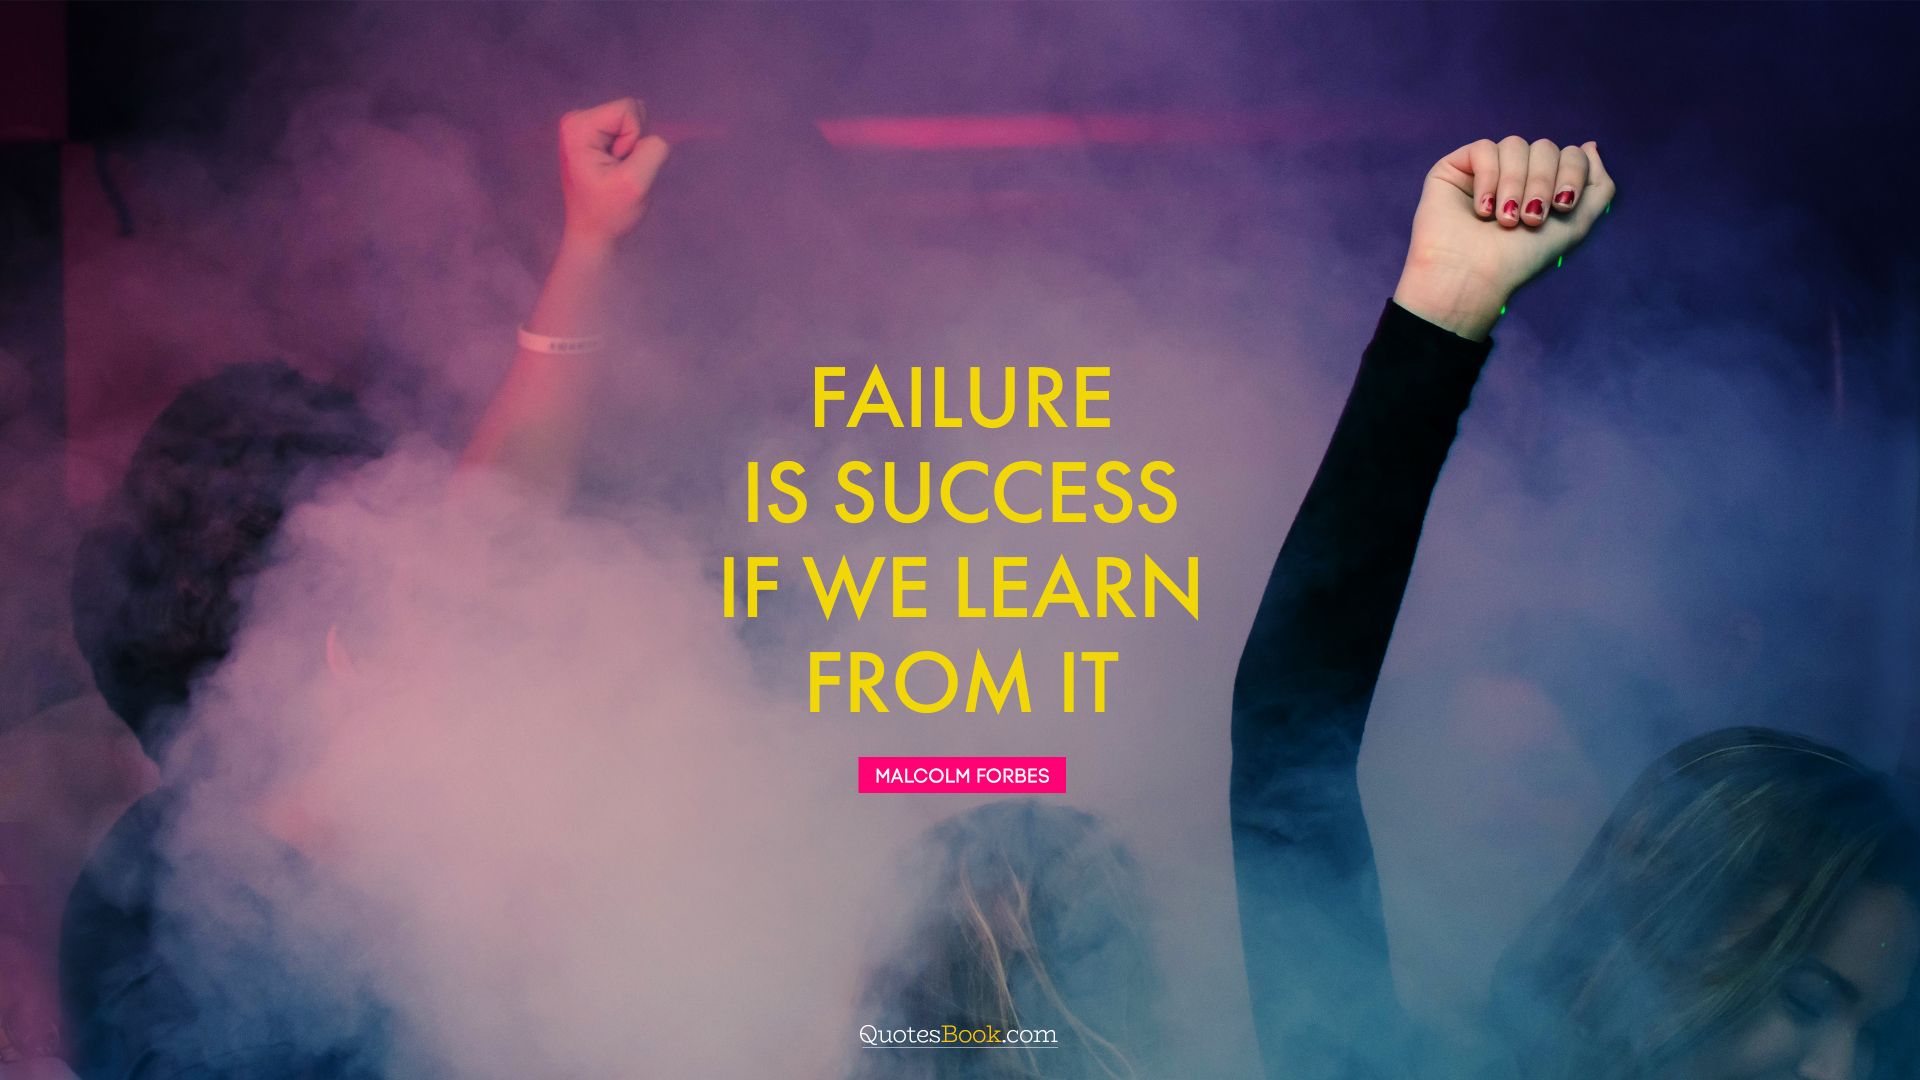 Failure is success if we learn from it. - Quote by Malcolm Forbes